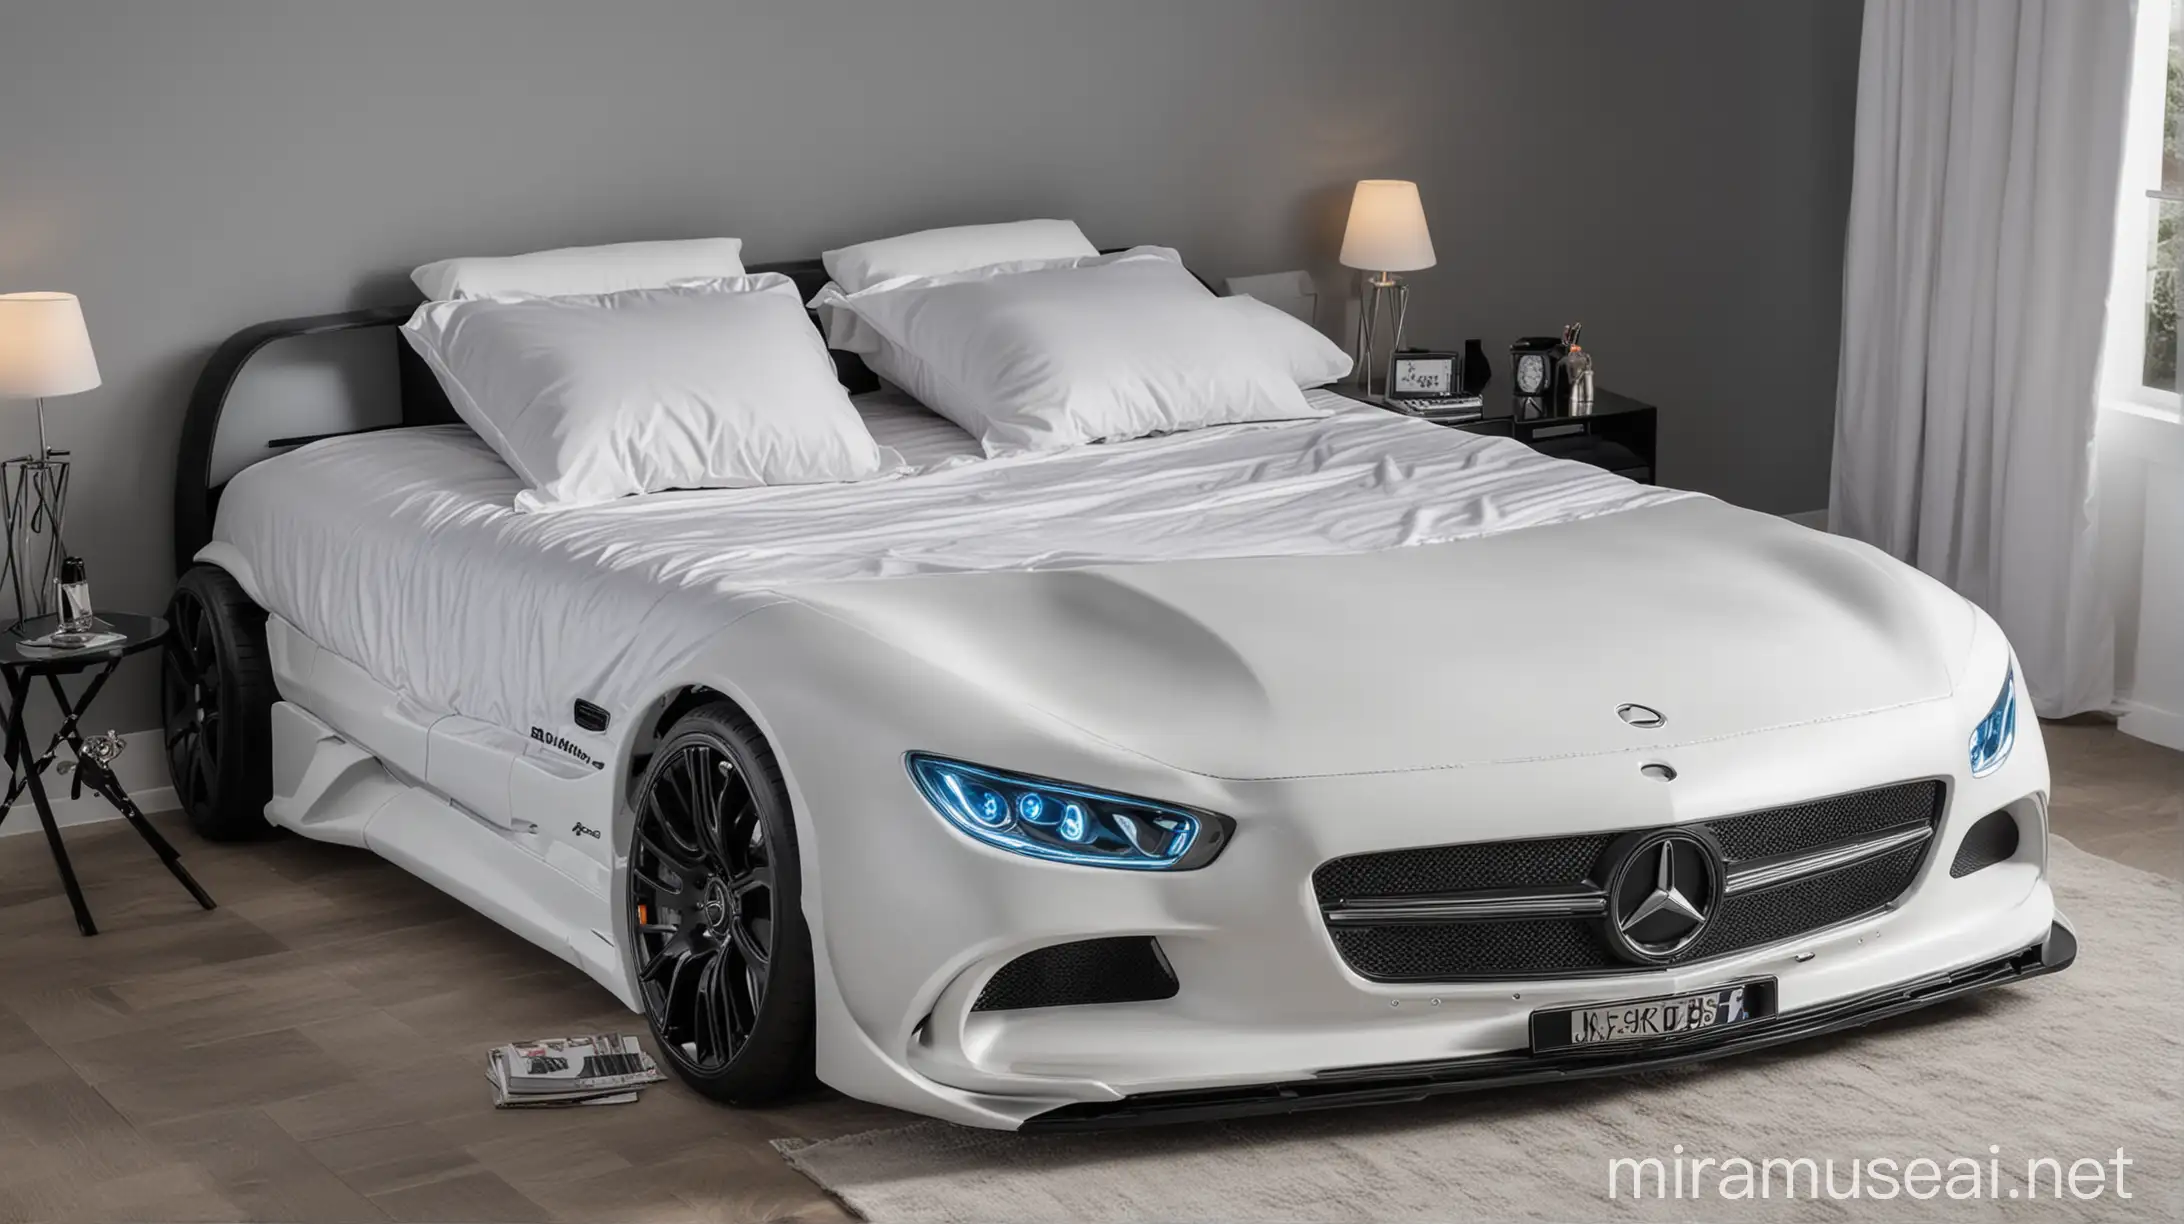 Luxurious Double Bed Mercedes AMG Automobile Inspired Design